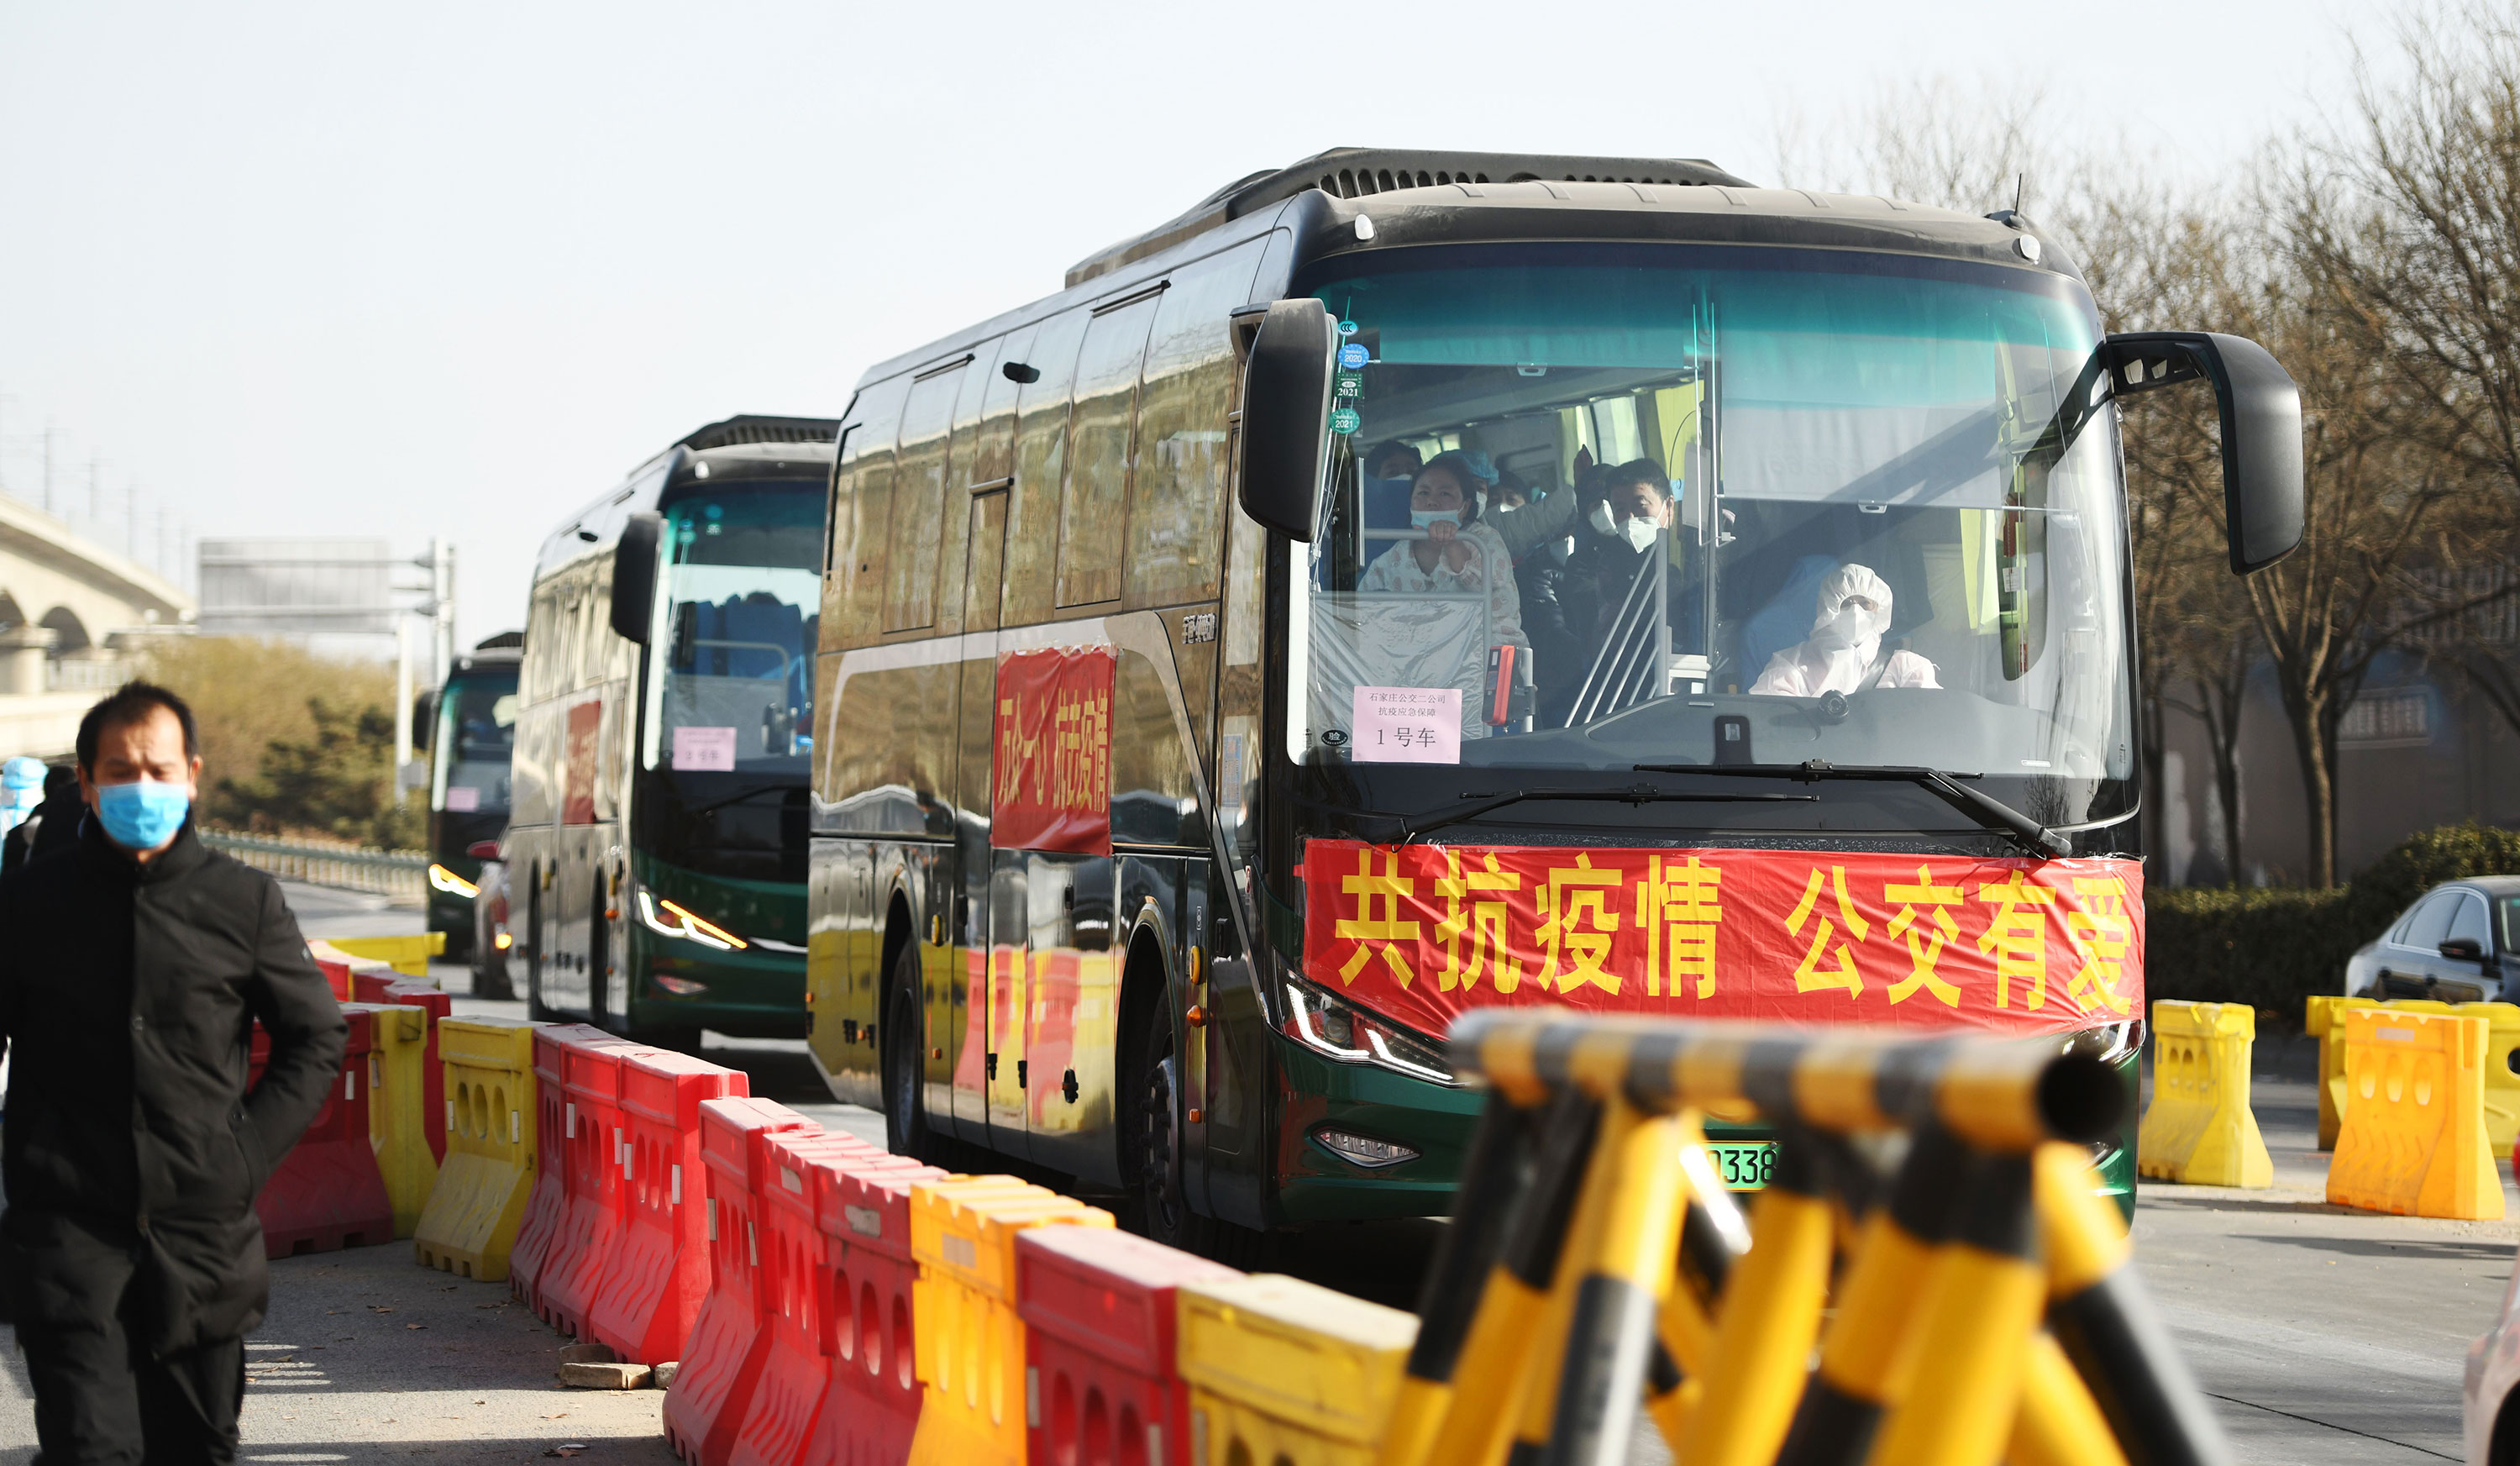 Buses carrying villagers from the Gaocheng district of Shijiazhuang, China, head to centralized quarantine sites on January 11.